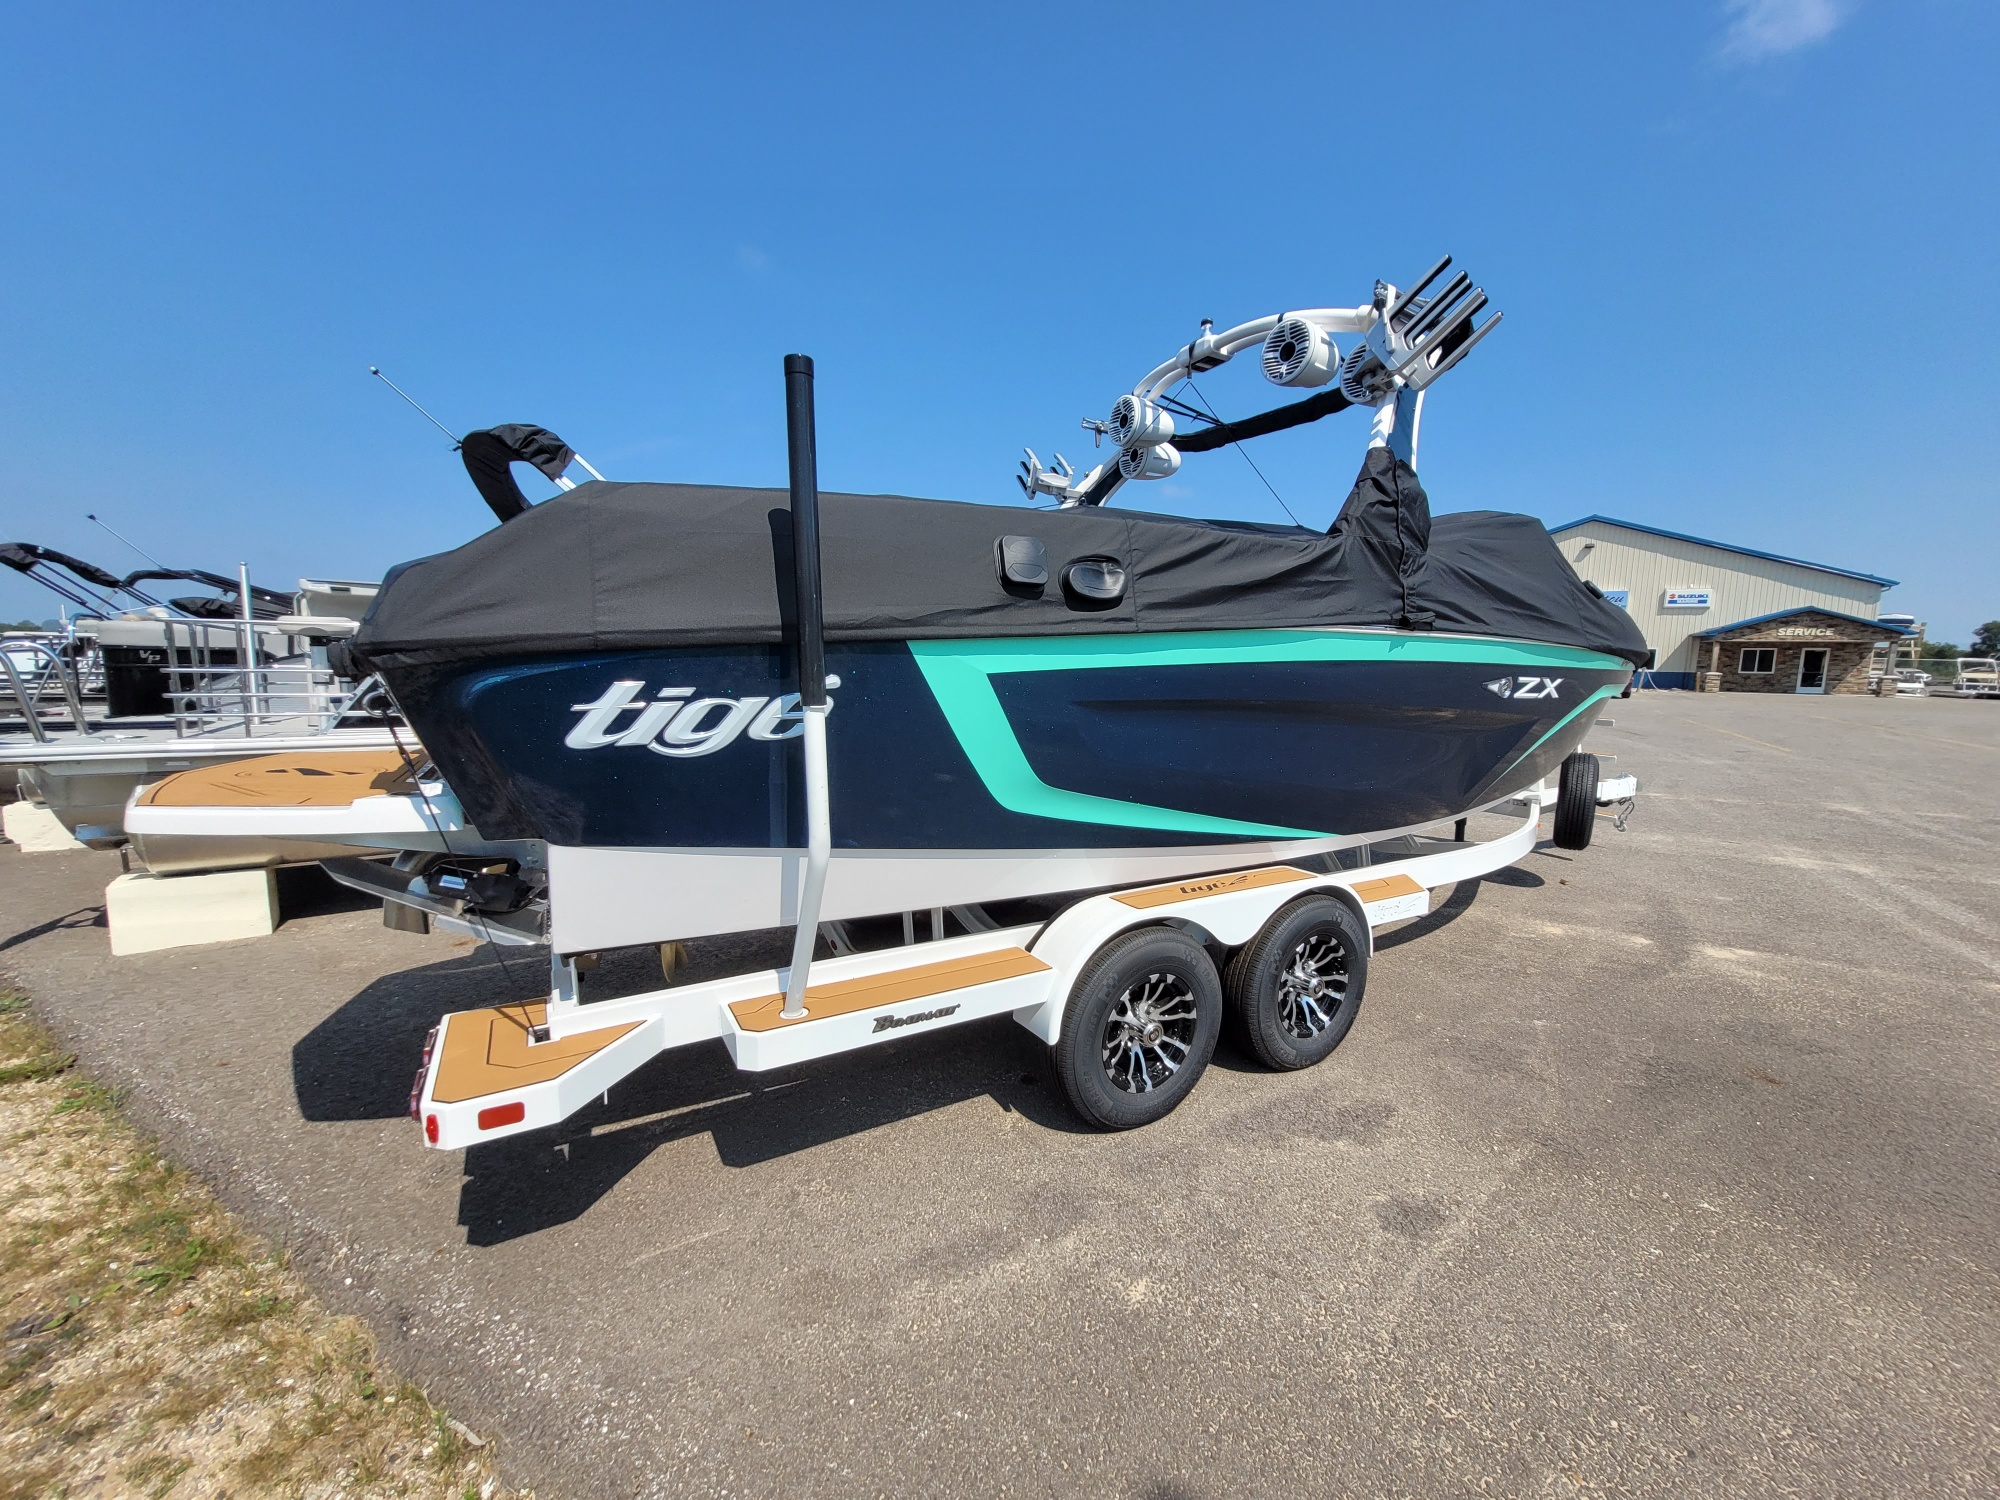 Tige Zx boats for sale - Boat Trader